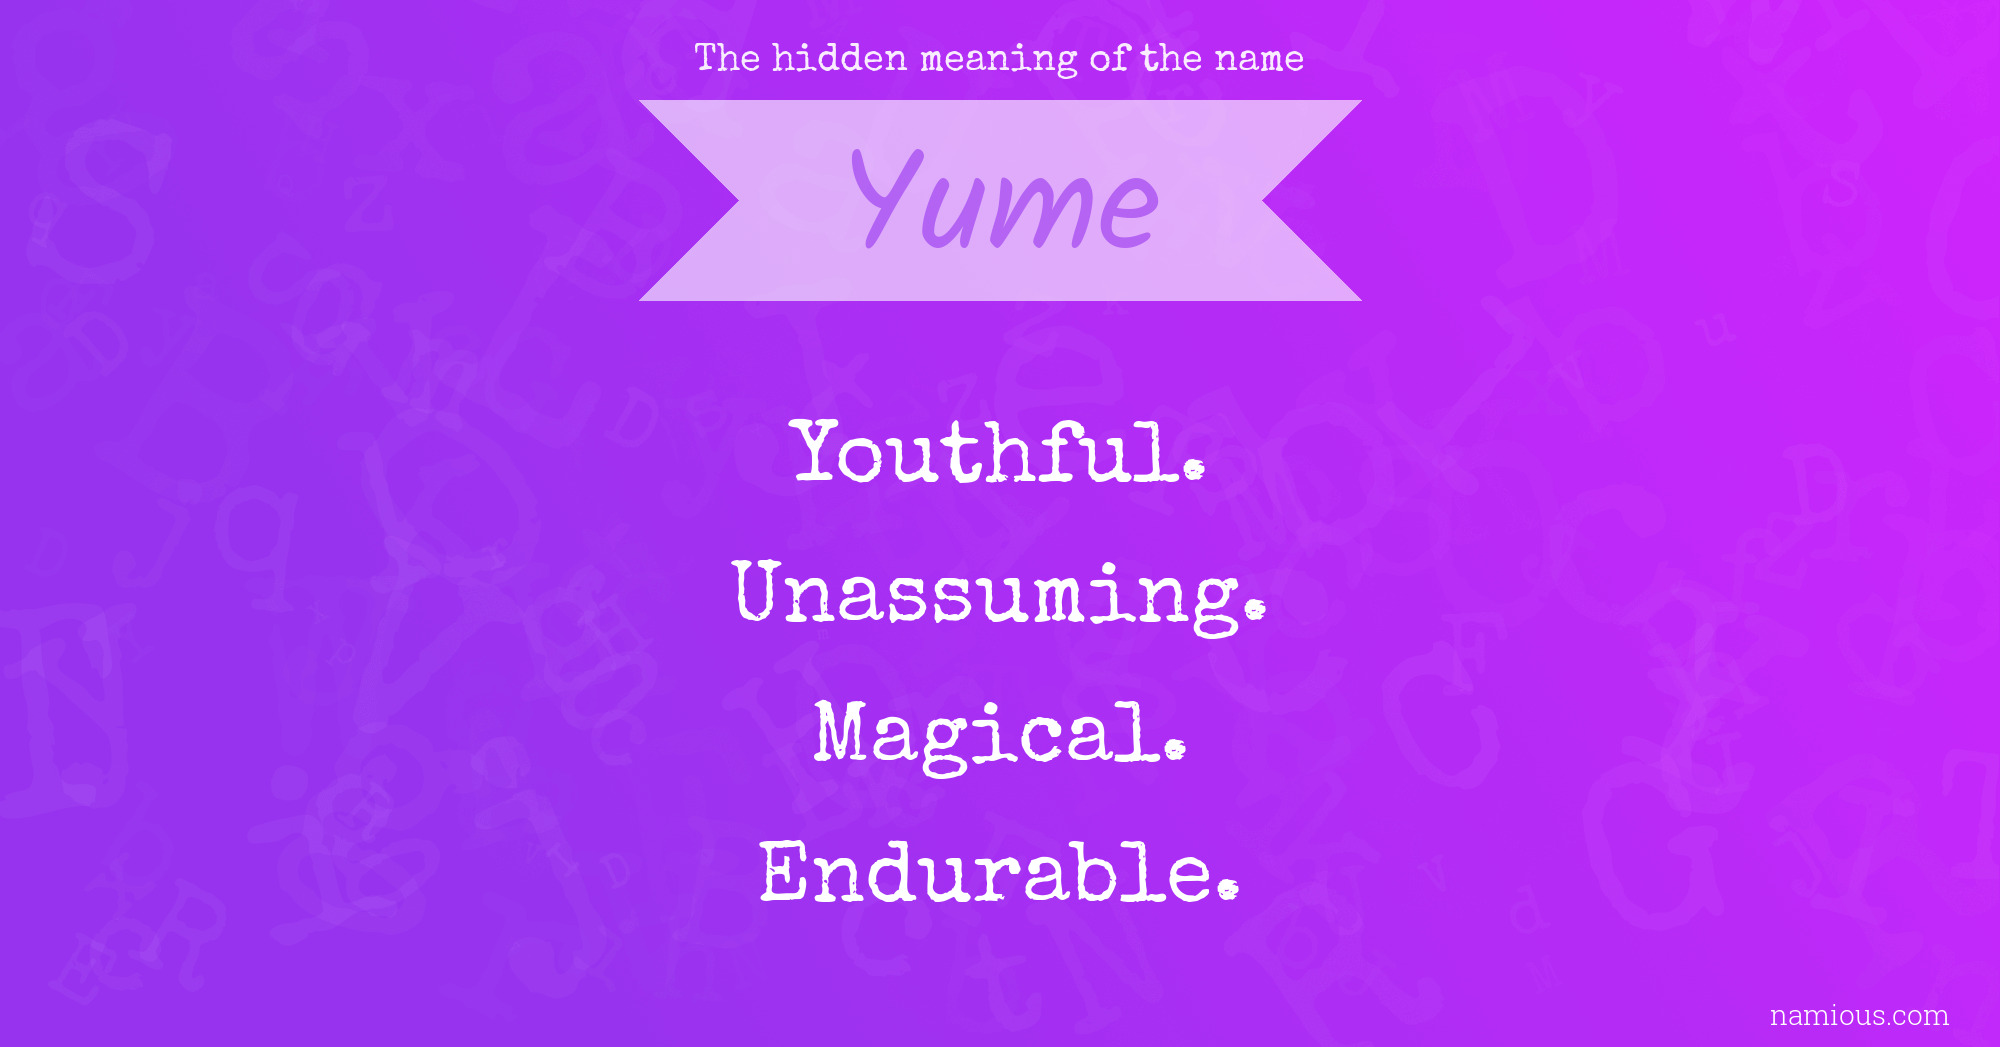 The hidden meaning of the name Yume